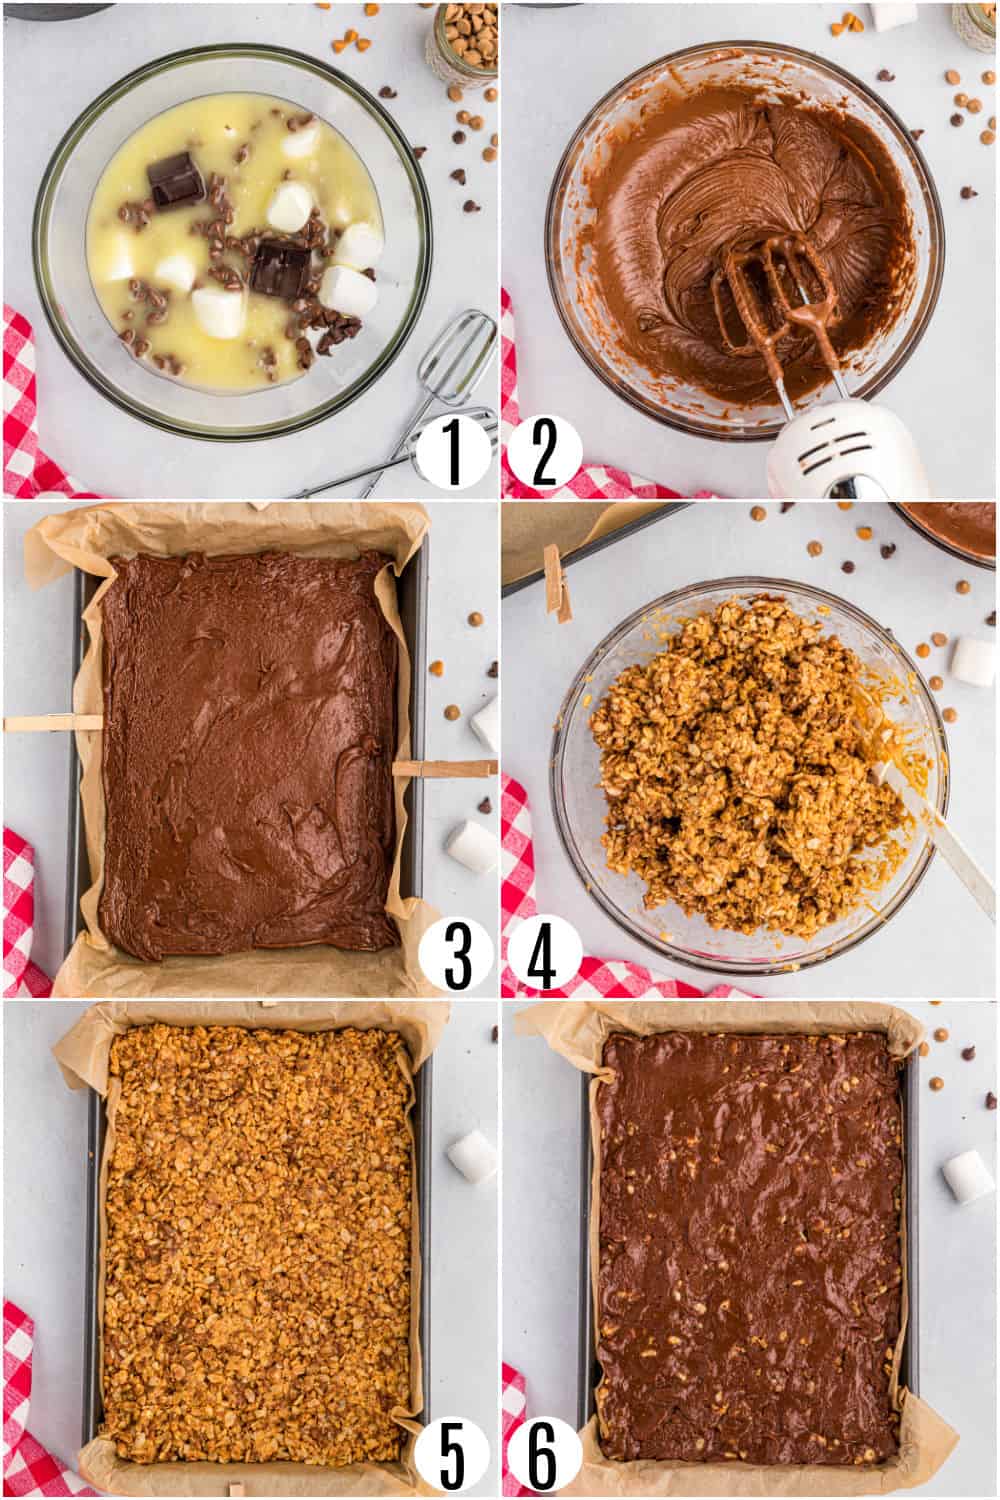 Step by step photos showing how to make homemade kit kat bars.